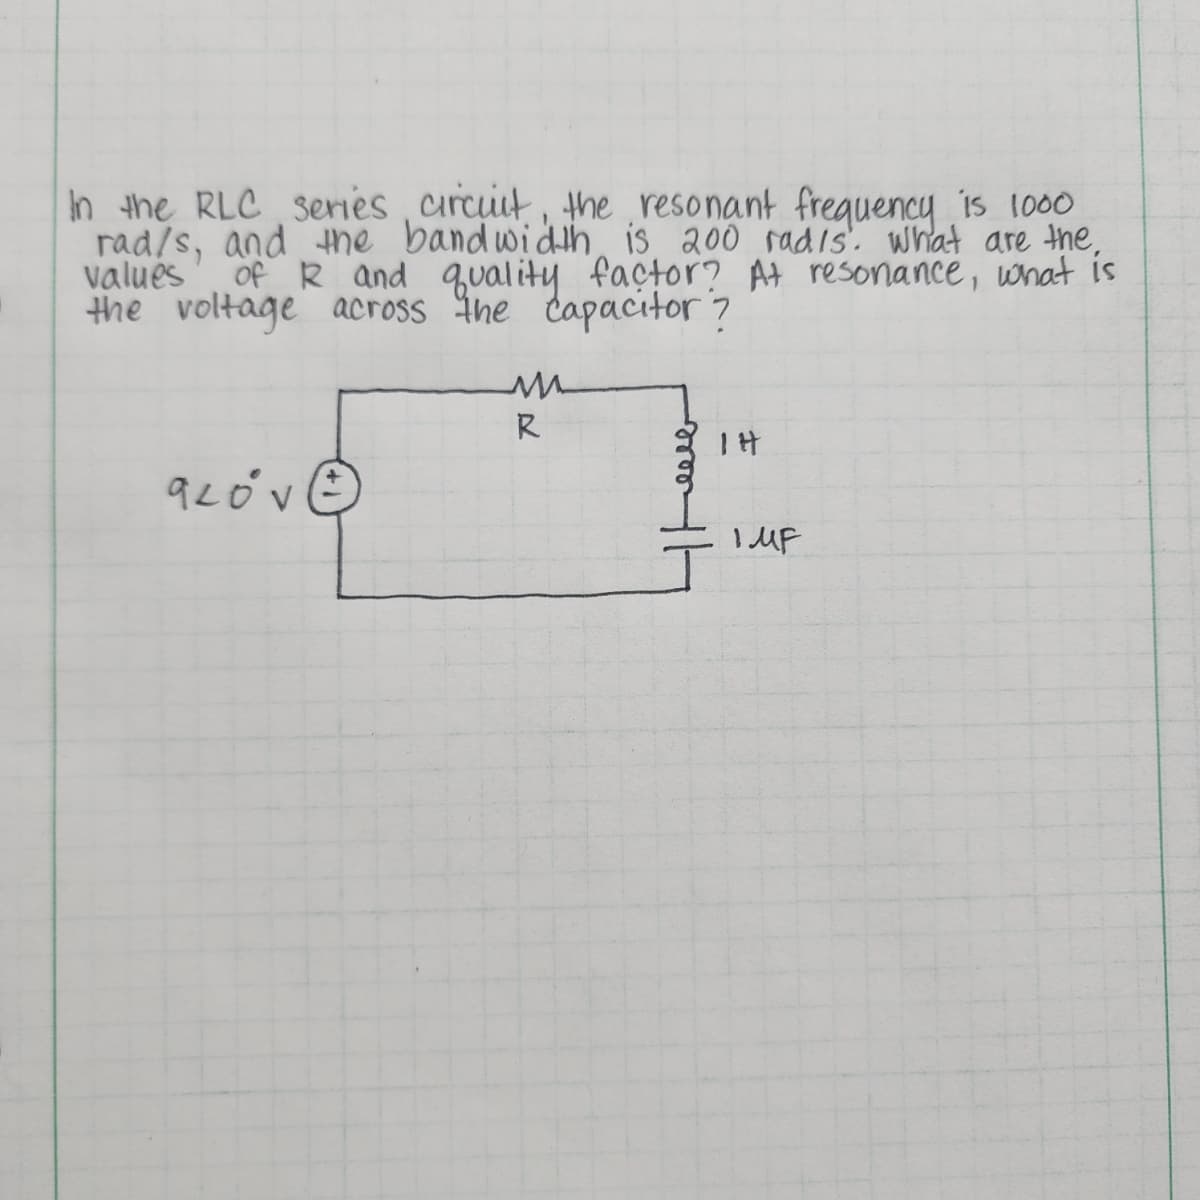 In the RLC series circuit, the resonant frequency is 1000
rad/s, and the bandwidth is 200 radis. What are the,
of R and quality factor? At resonance, what is
the voltage across the capacitor?
values
920°V
R
14
IMF